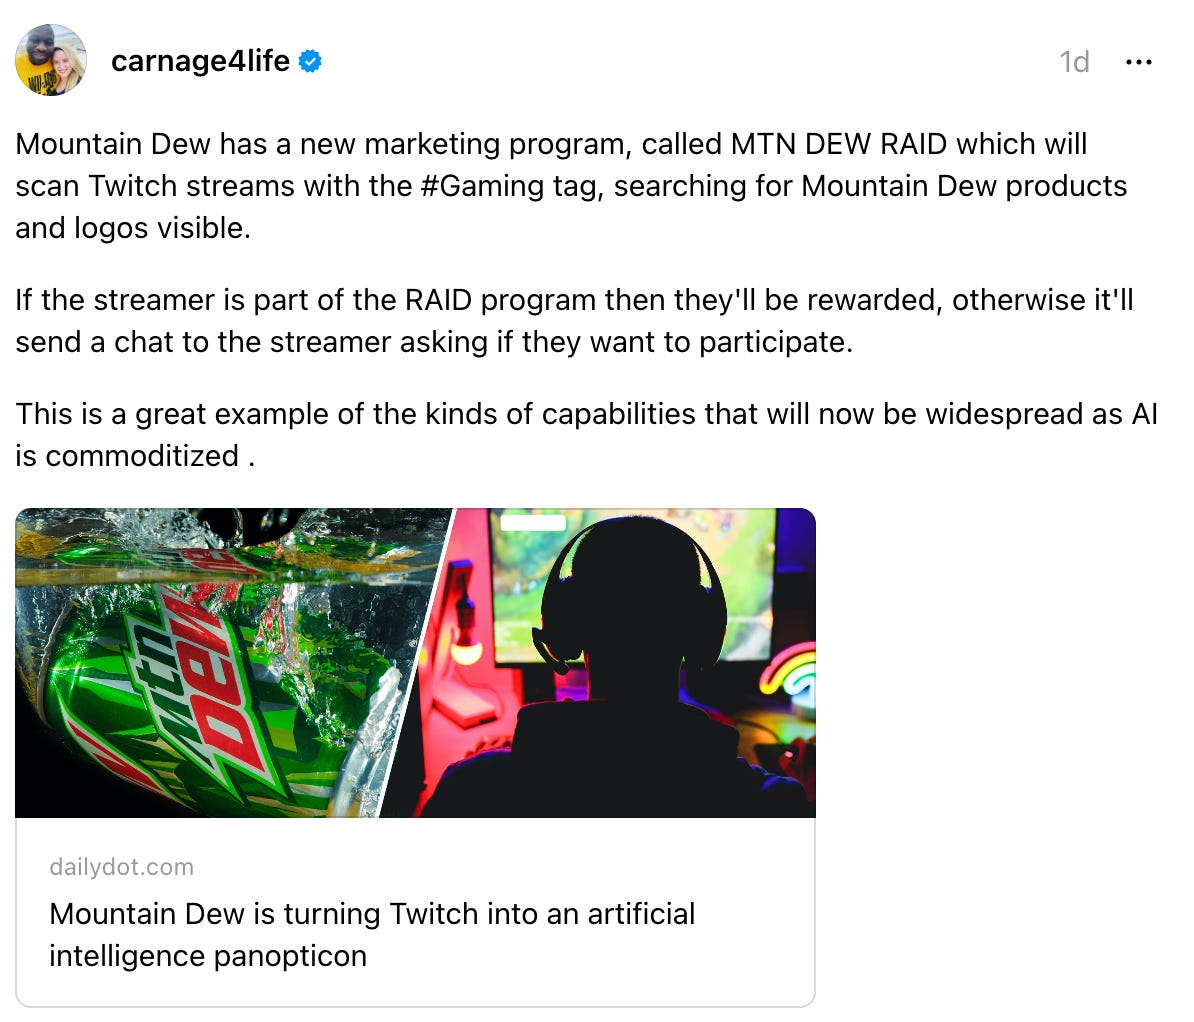  carnage4life's profile picture carnage4life 1d Mountain Dew has a new marketing program, called MTN DEW RAID which will scan Twitch streams with the #Gaming tag, searching for Mountain Dew products and logos visible. If the streamer is part of the RAID program then they'll be rewarded, otherwise it'll send a chat to the streamer asking if they want to participate. This is a great example of the kinds of capabilities that will now be widespread as AI is commoditized . Mountain Dew is turning Twitch into an artificial intelligence panopticon dailydot.com Mountain Dew is turning Twitch into an artificial intelligence panopticon